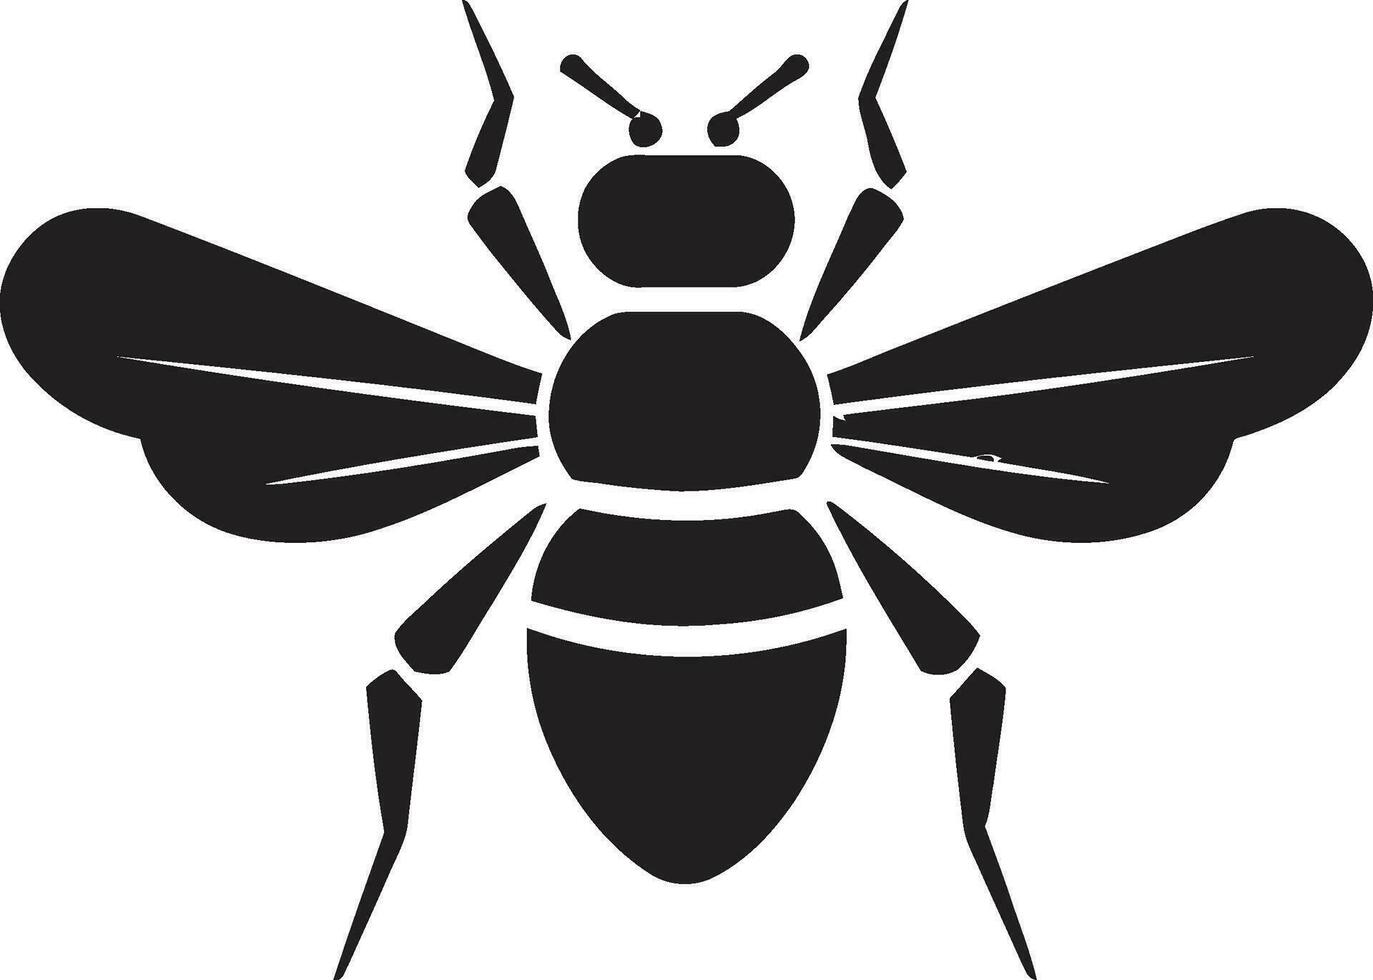 Vectorized Monochrome Hornet Icon Contemporary Hornet in the Night vector